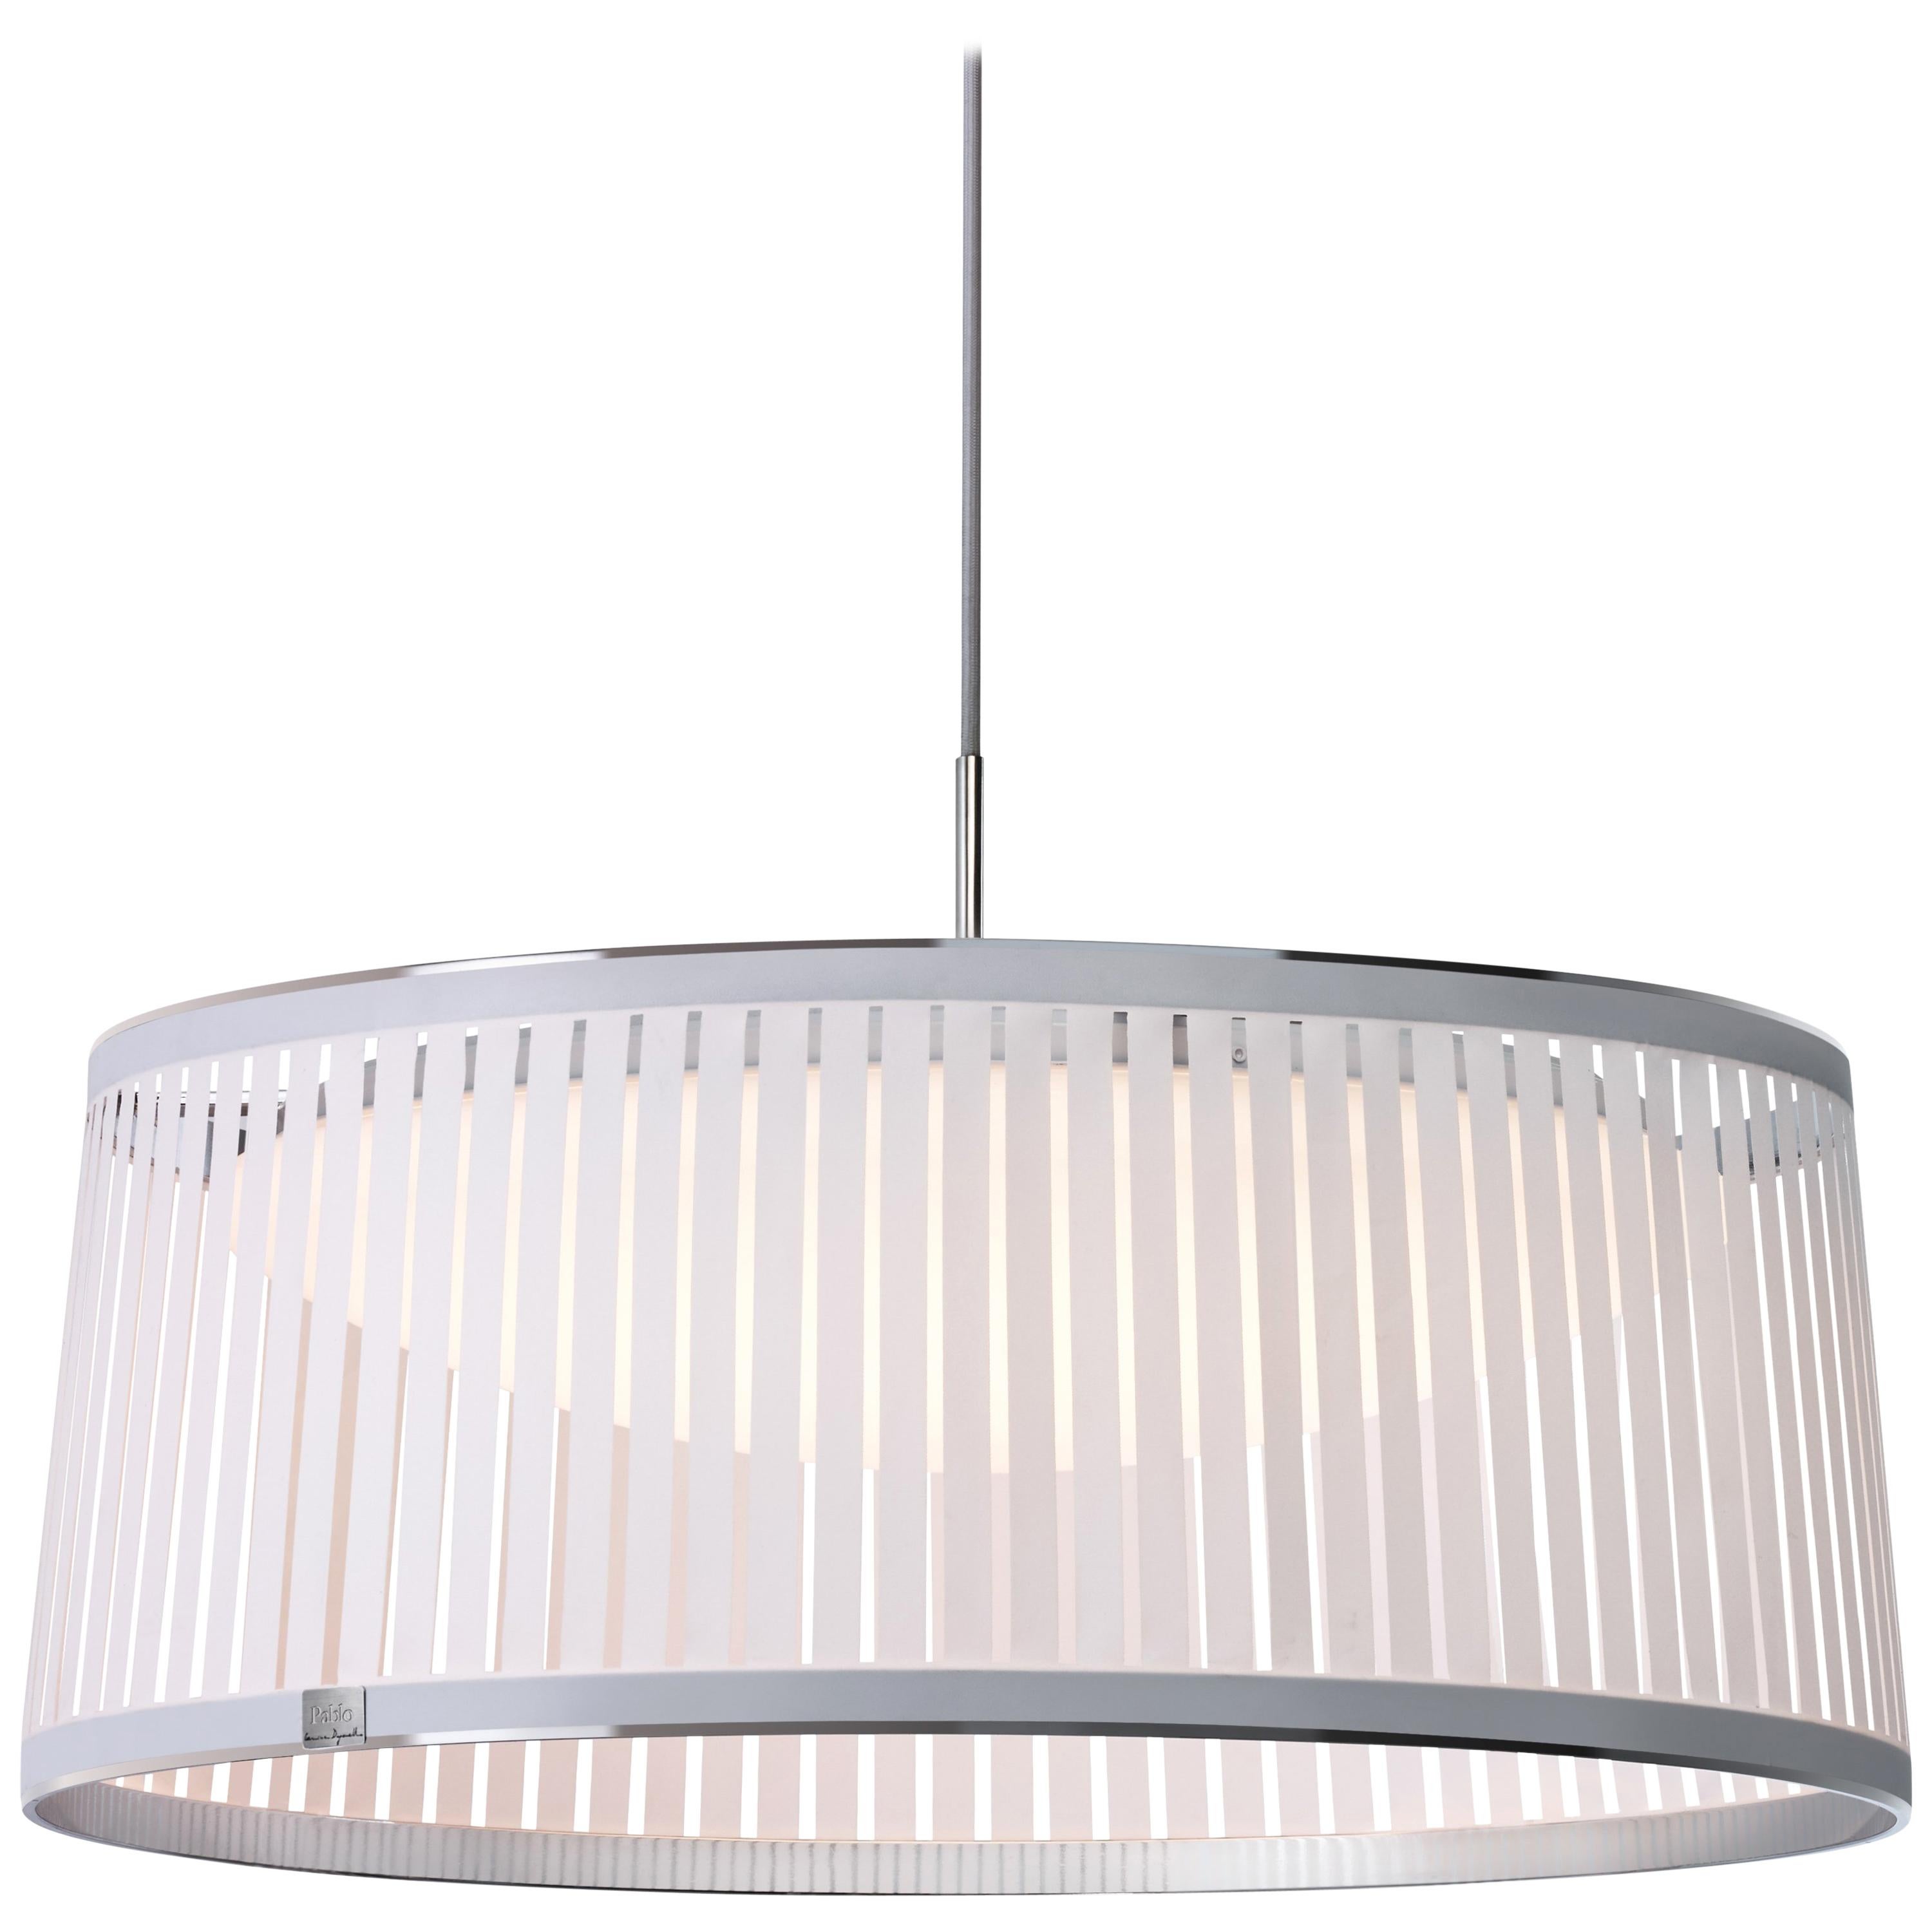 Solis Drum 24 Pendant Light in White by Pablo Designs For Sale